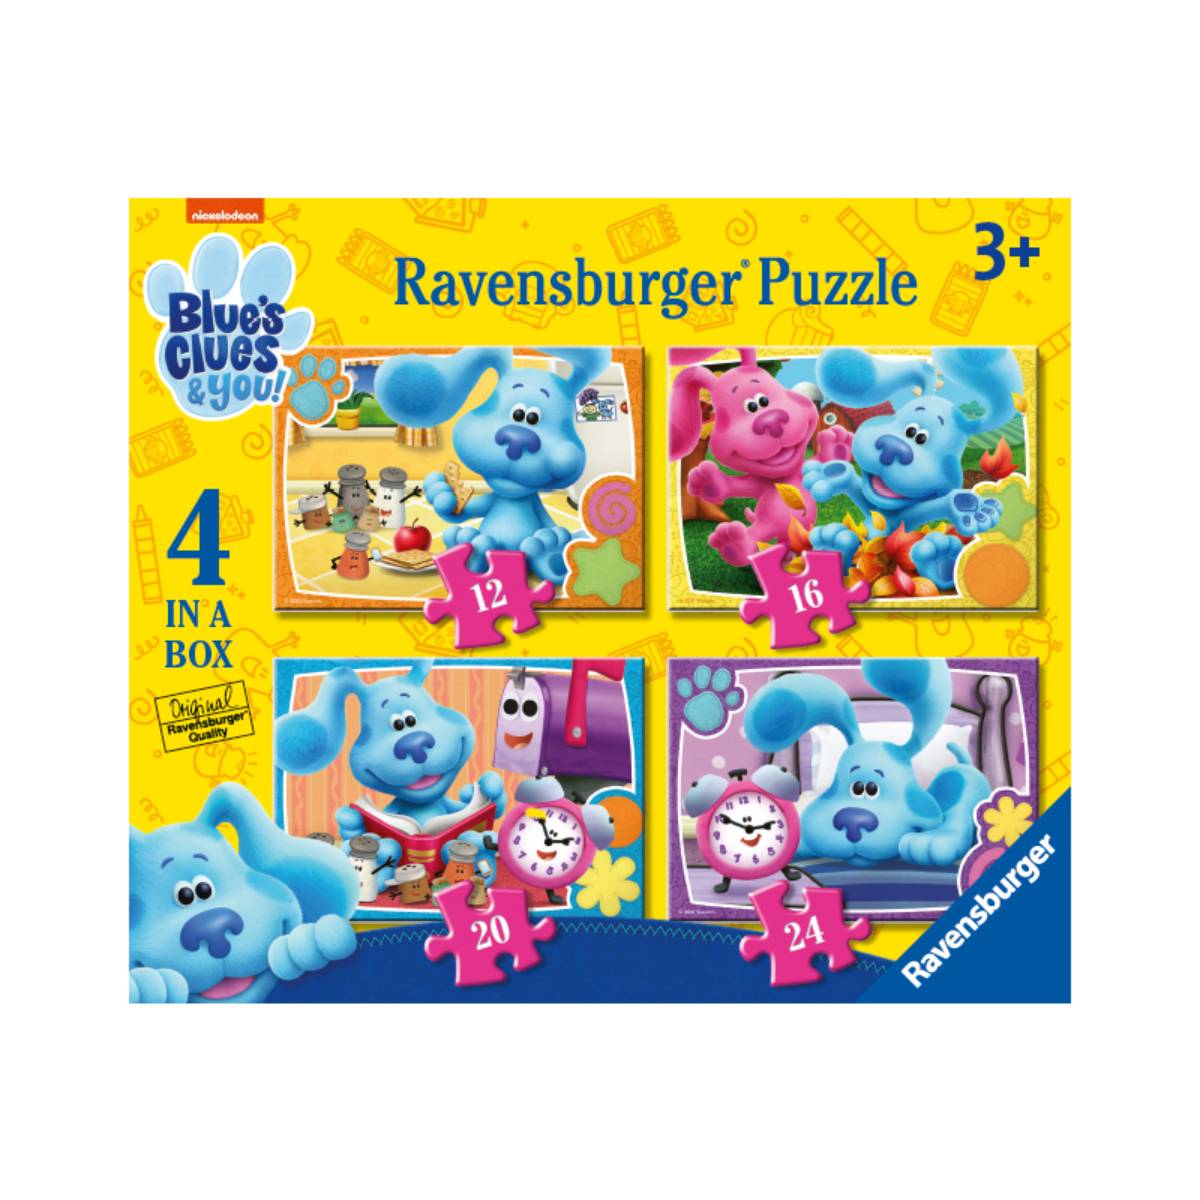 RAVENSBURGER WE LOVE A BLUES CLUES DAY